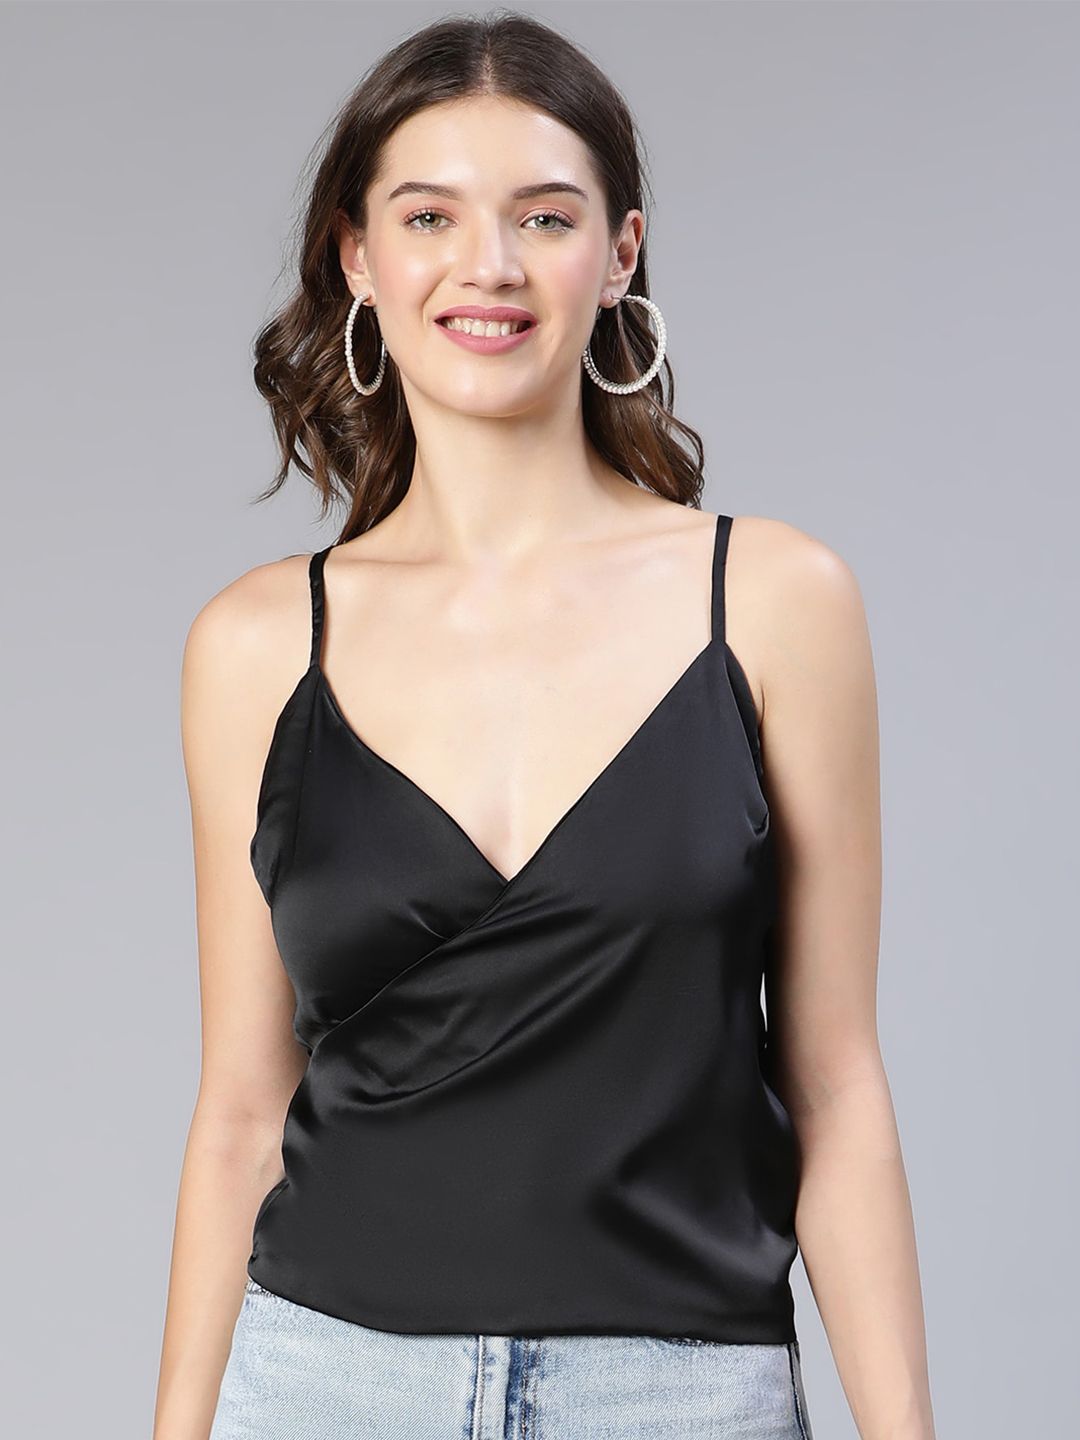 Oxolloxo Satin Partywear Wrap Top Price in India